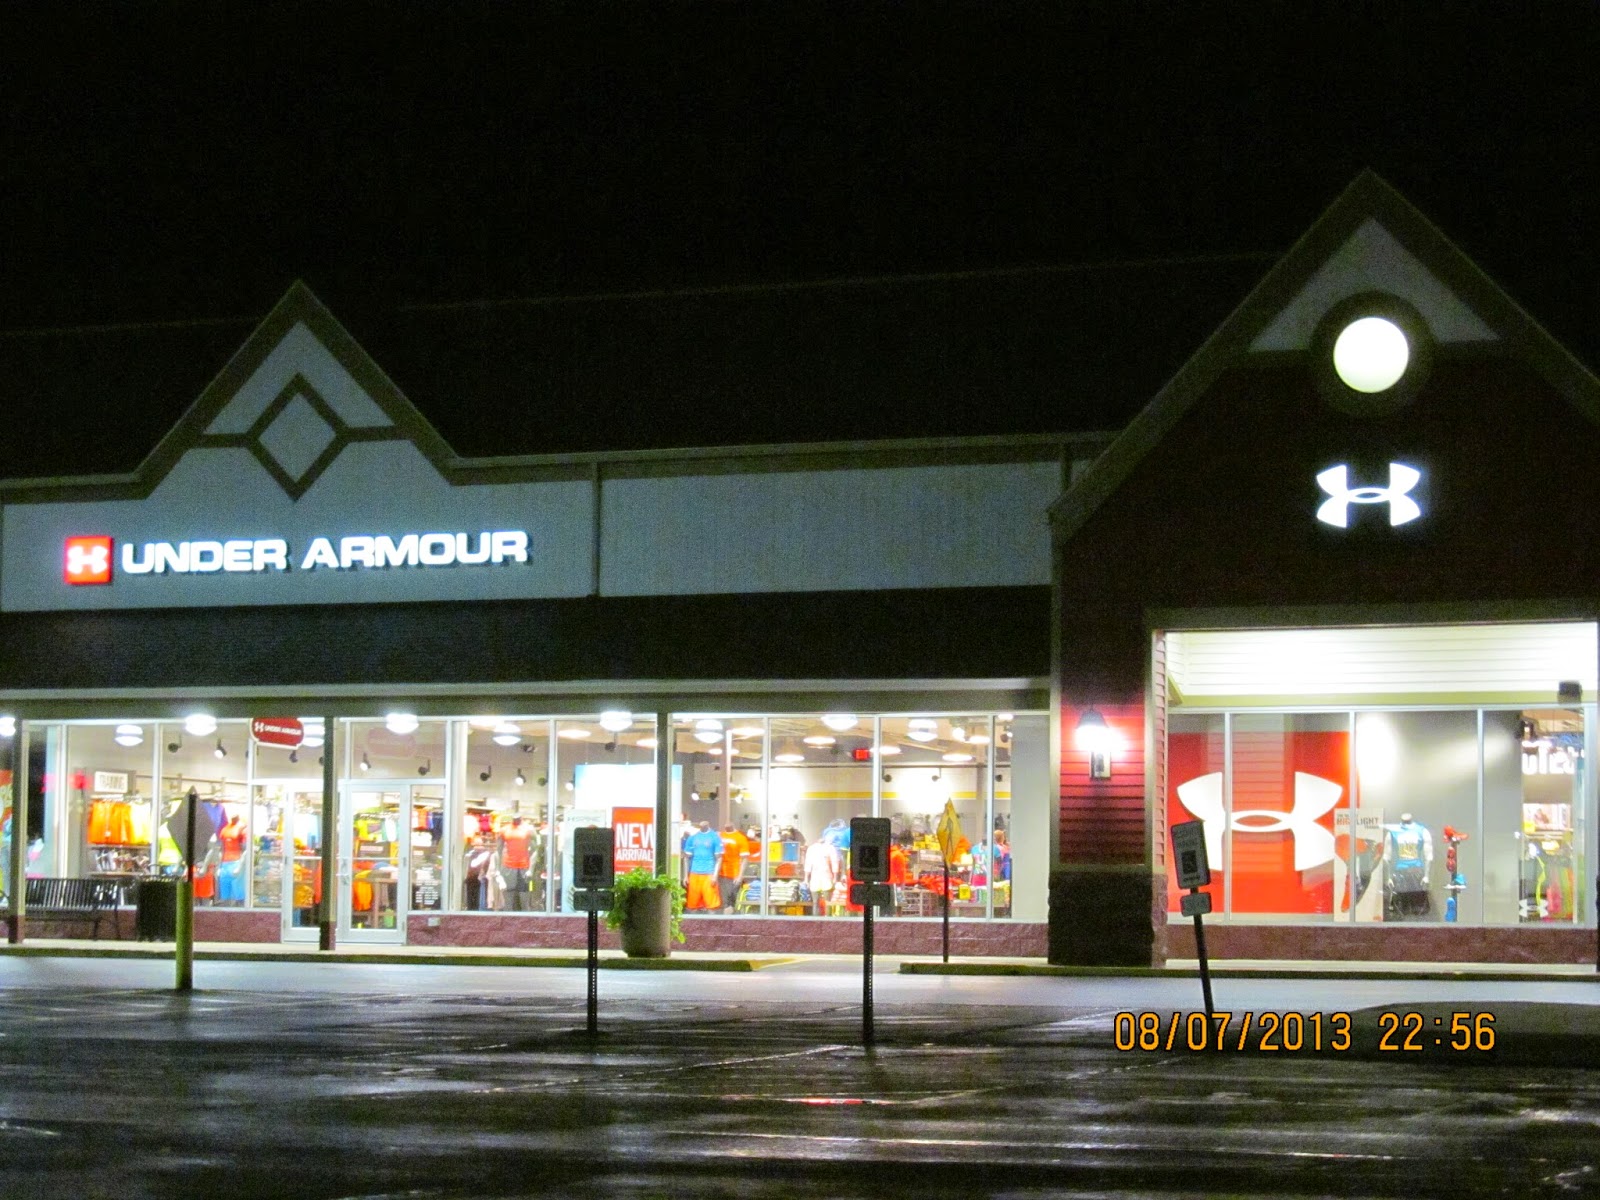 Trip to the Mall: Tanger Outlets- (Tuscola, IL)